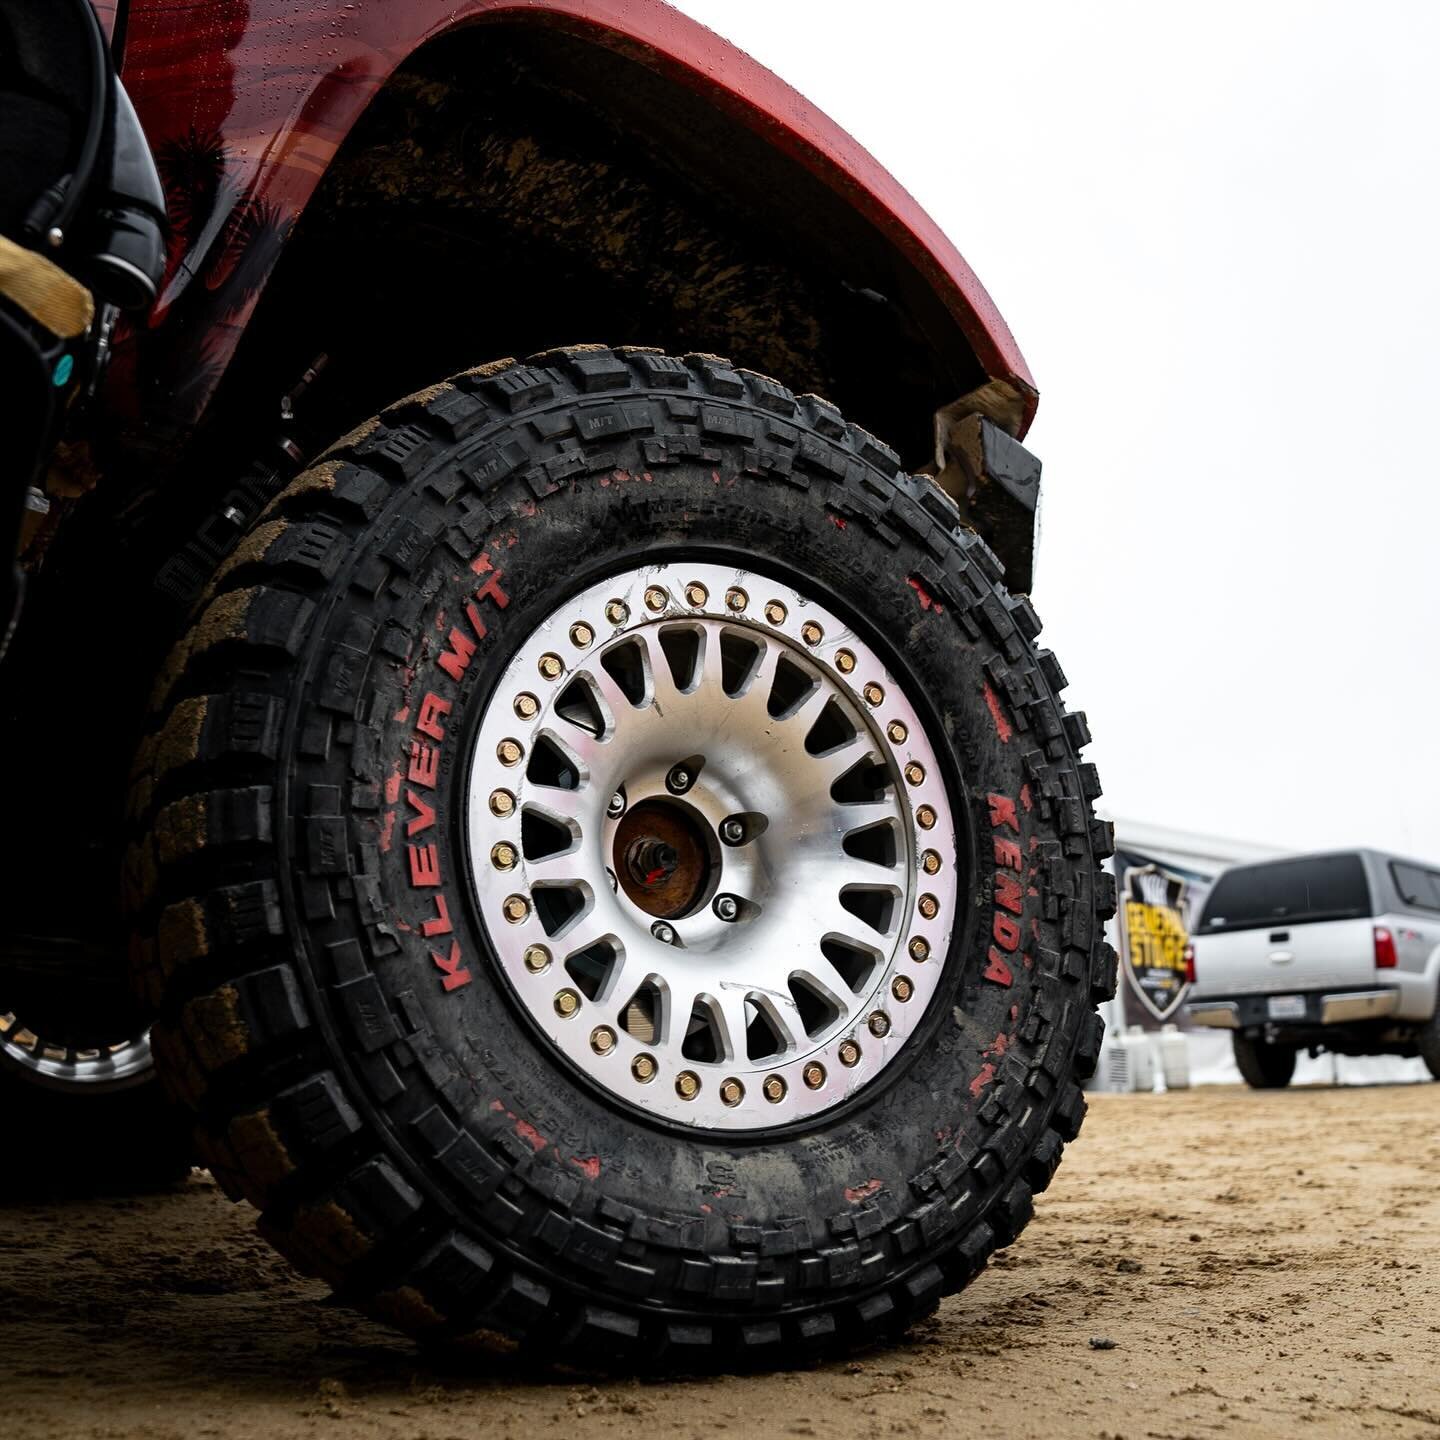 People are constantly asking about our wheels and tires and we always have nothing but good to say about them.

For starters, the @kendatire. This brand came into our life through a tire size. I (@a.flemster) found Kenda through their 35x10.50r17 aft